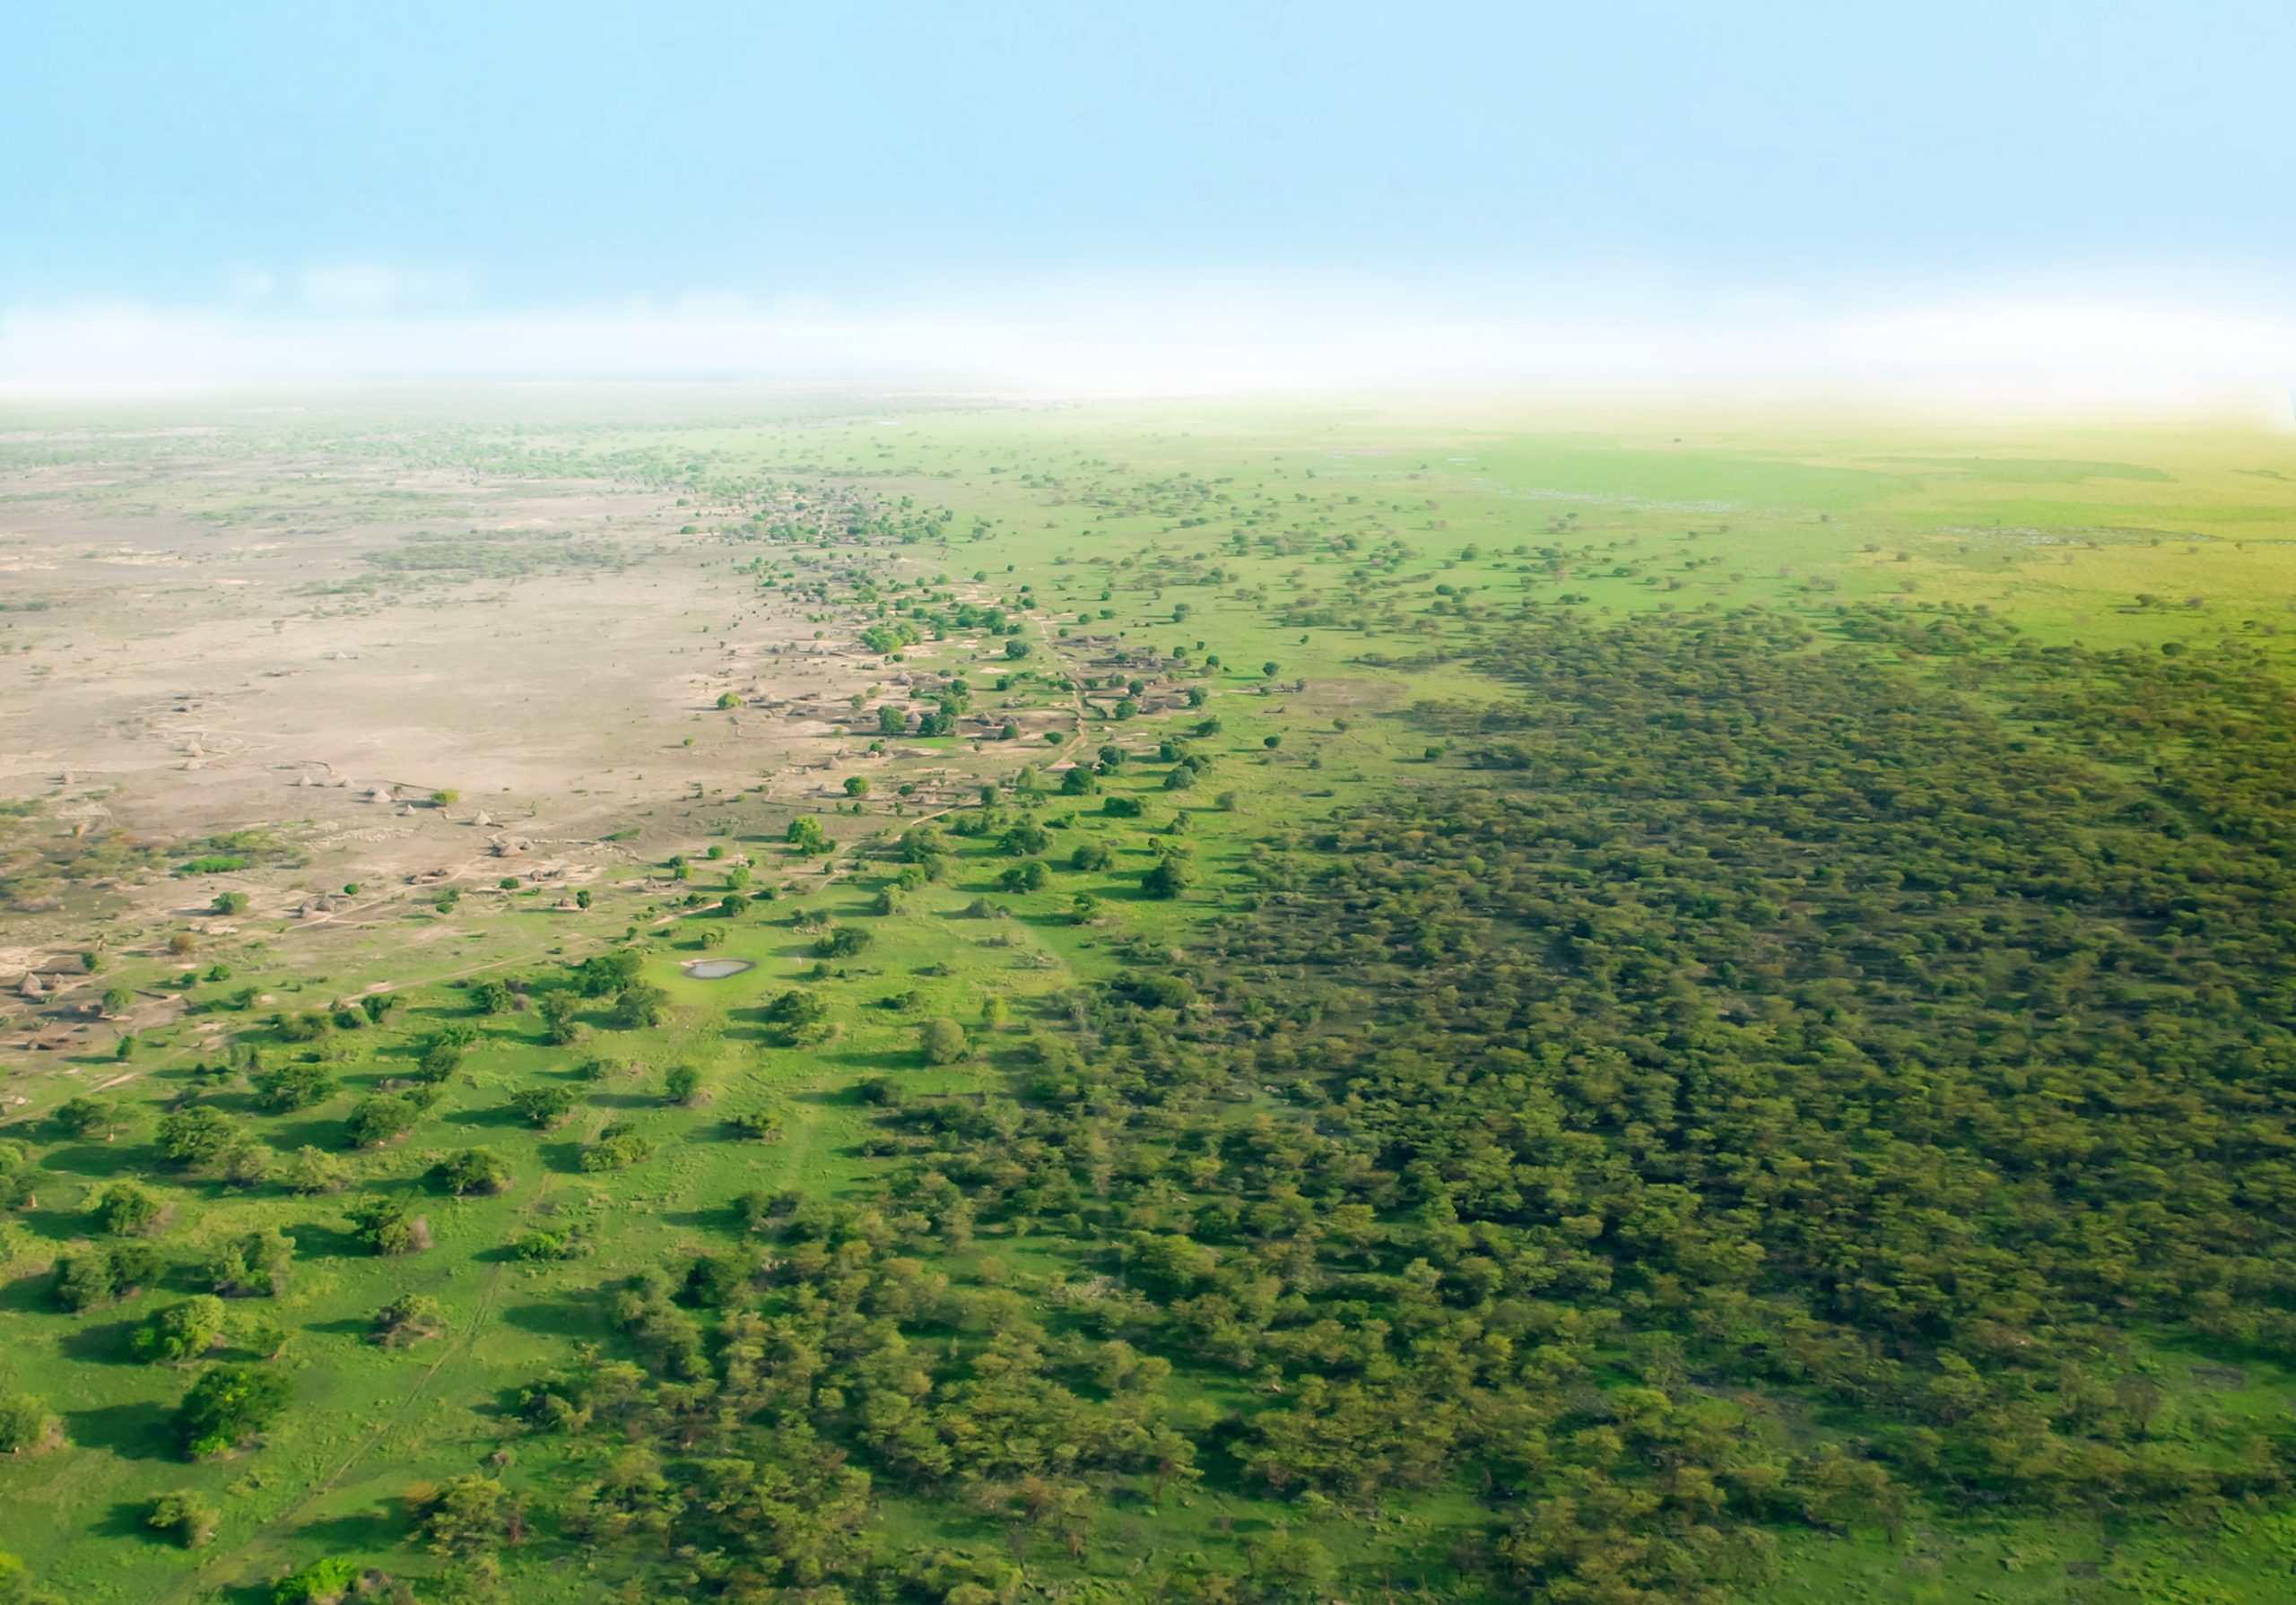 The Great Green Wall: an epic plan to hold back desert across Africa